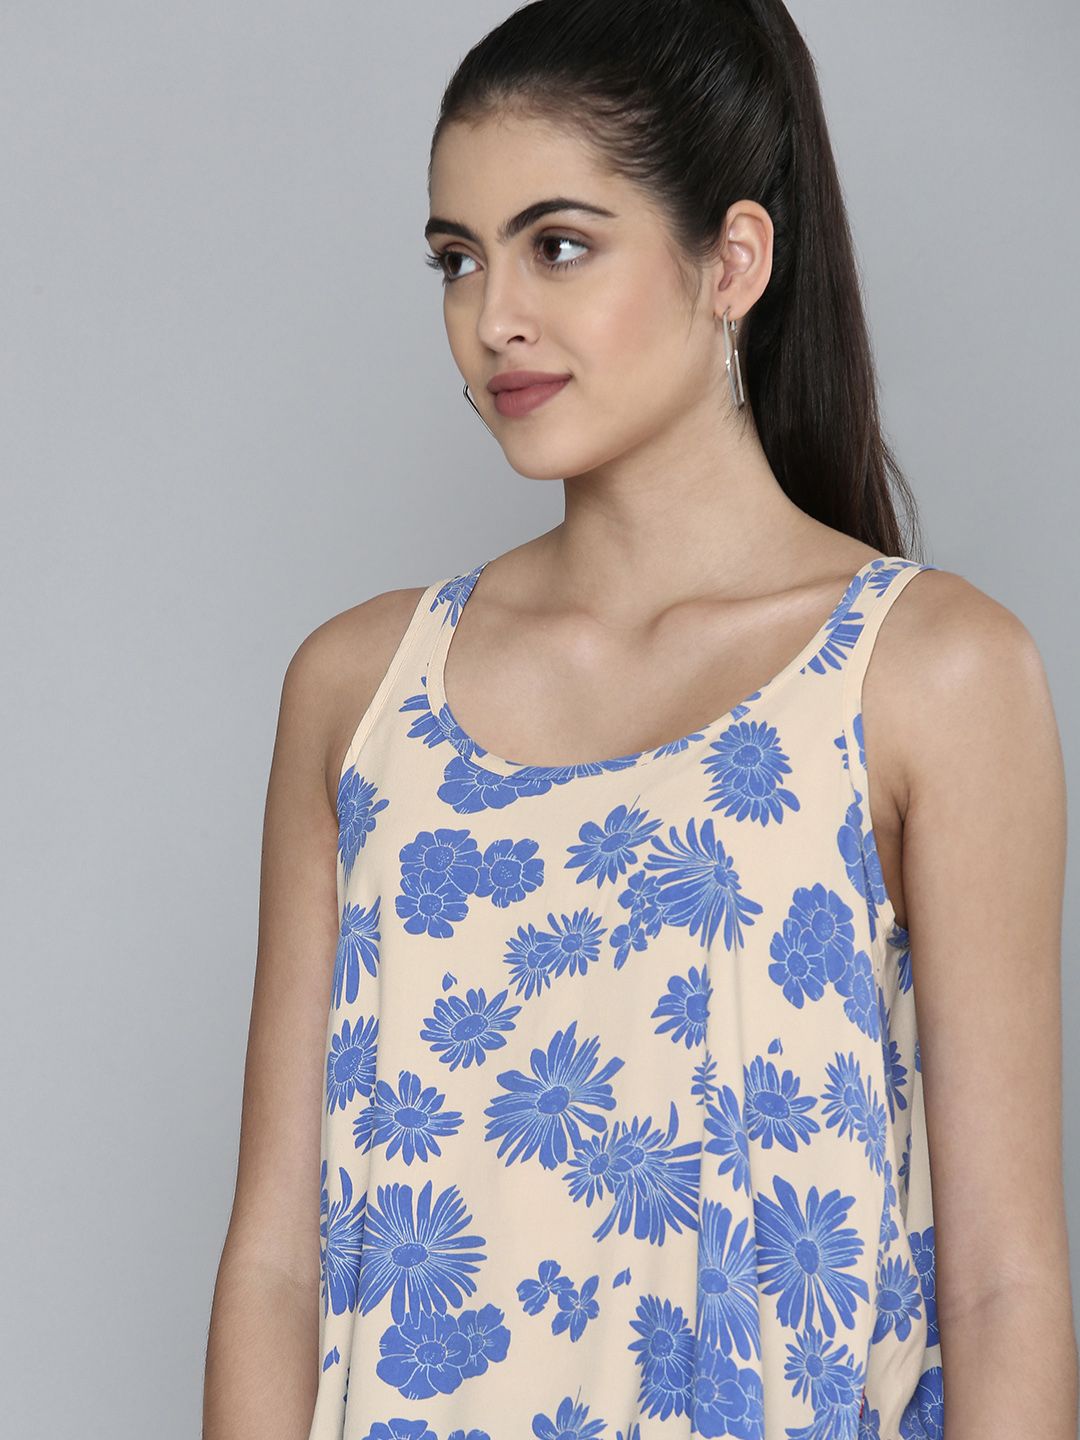 Levis Women Cream-Coloured & Blue Floral Print Top Price in India